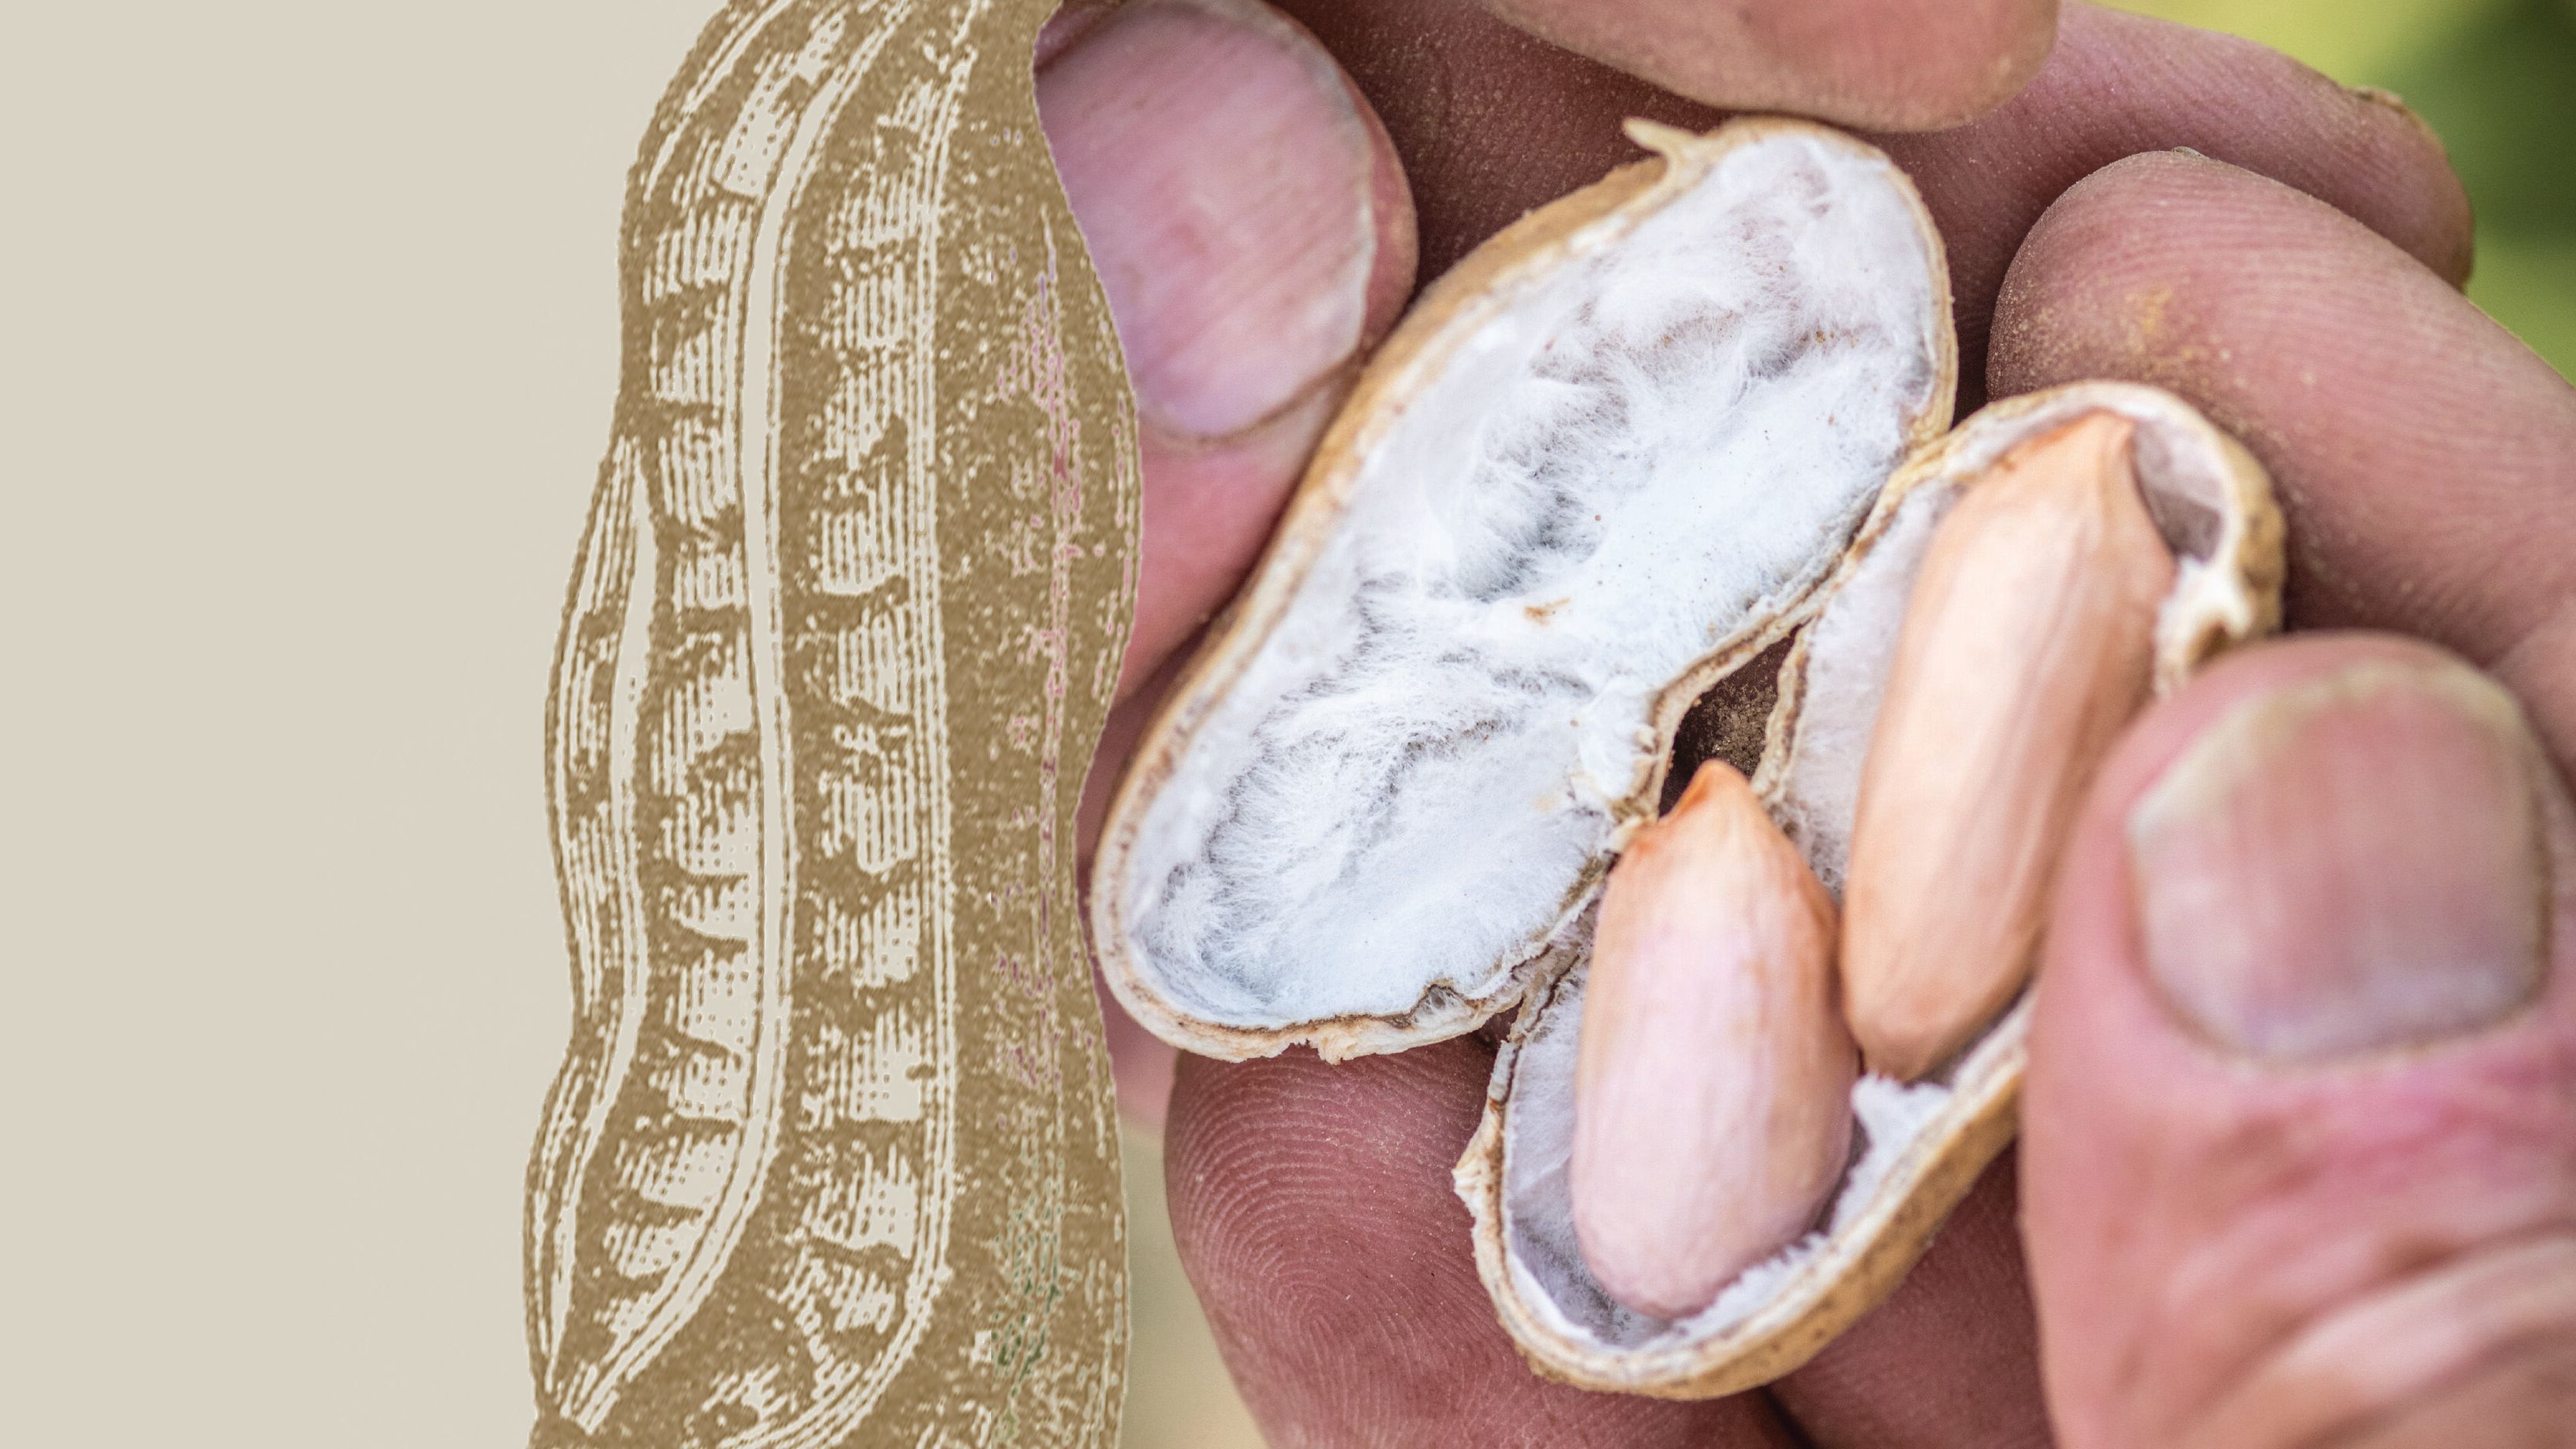 Closeup photo of fingers exposing the pale, immature peanut inside the shell.